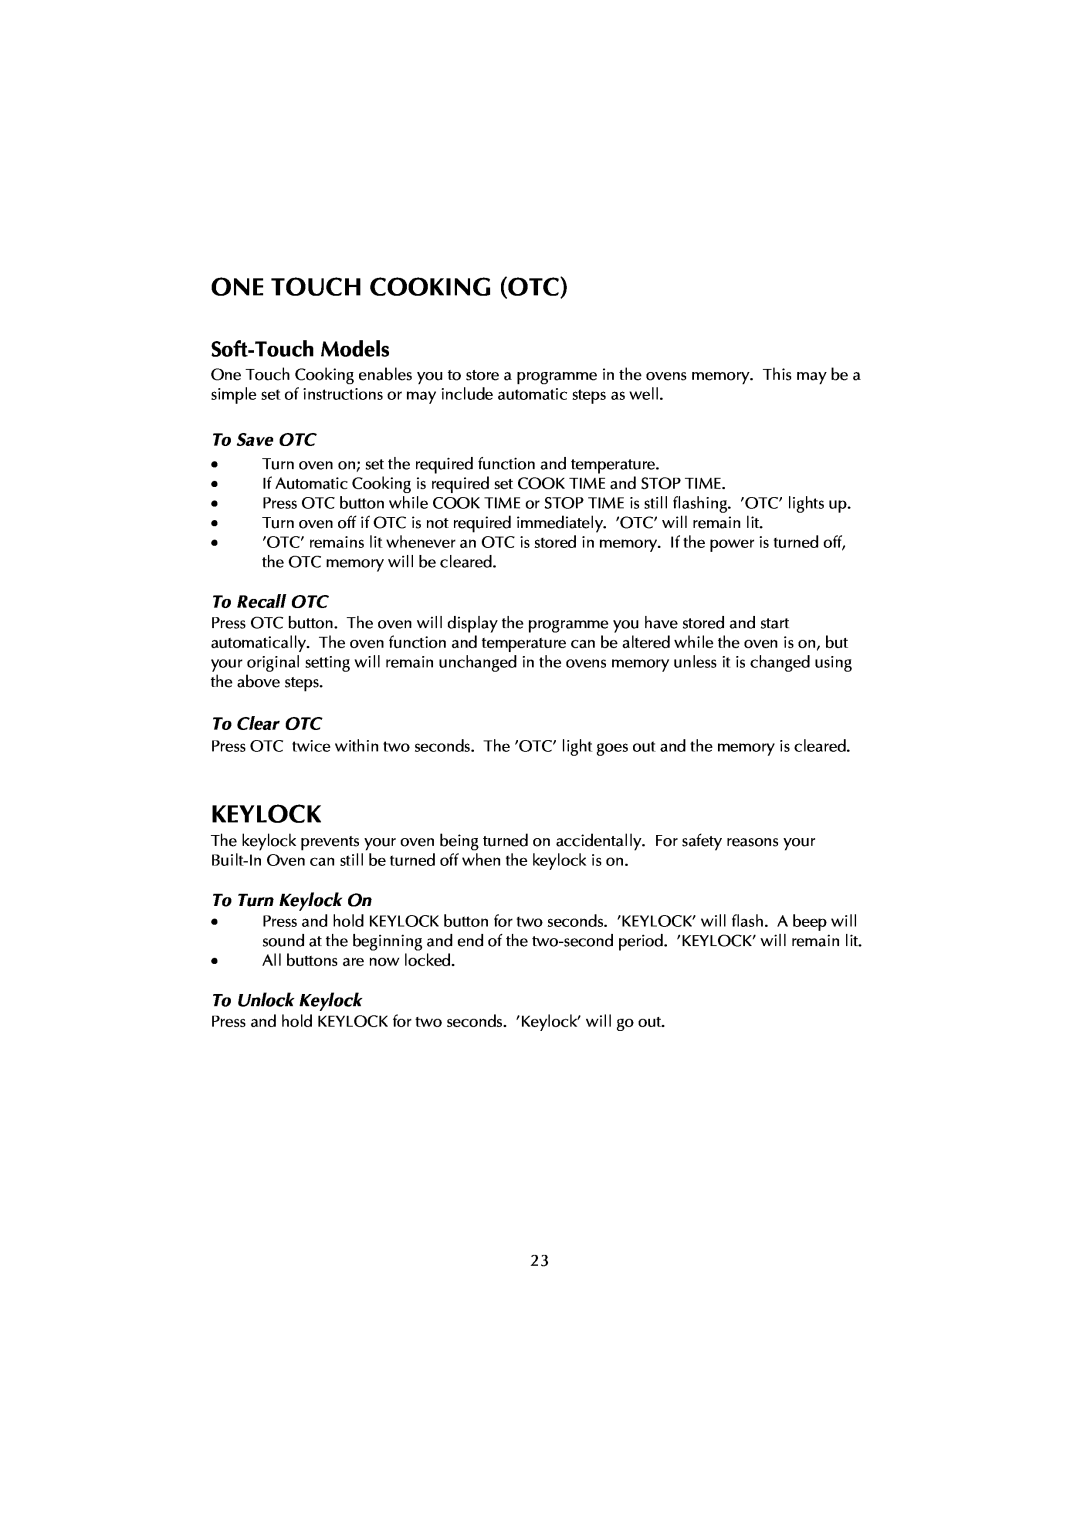 Fisher & Paykel 447443 manual One Touch Cooking Otc, To Save OTC, To Recall OTC, To Clear OTC, To Turn Keylock On 